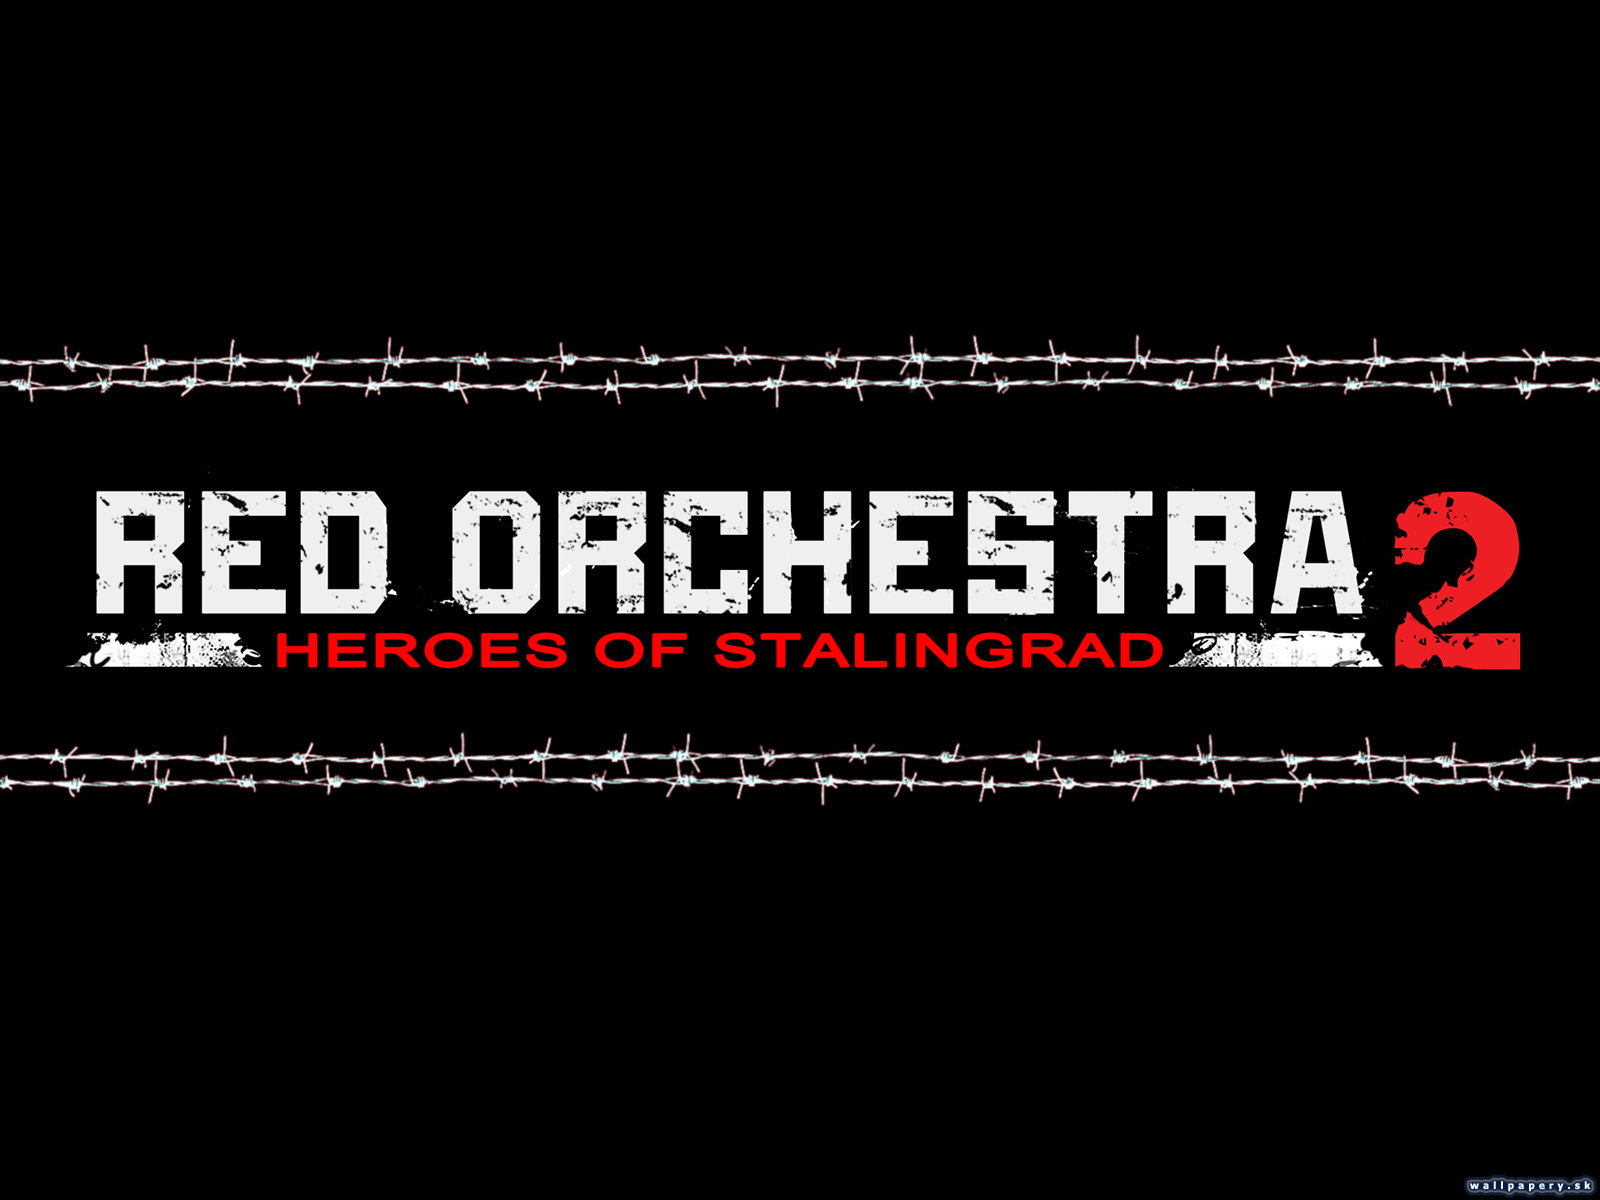 Red Orchestra 2: Heroes of Stalingrad - wallpaper 7